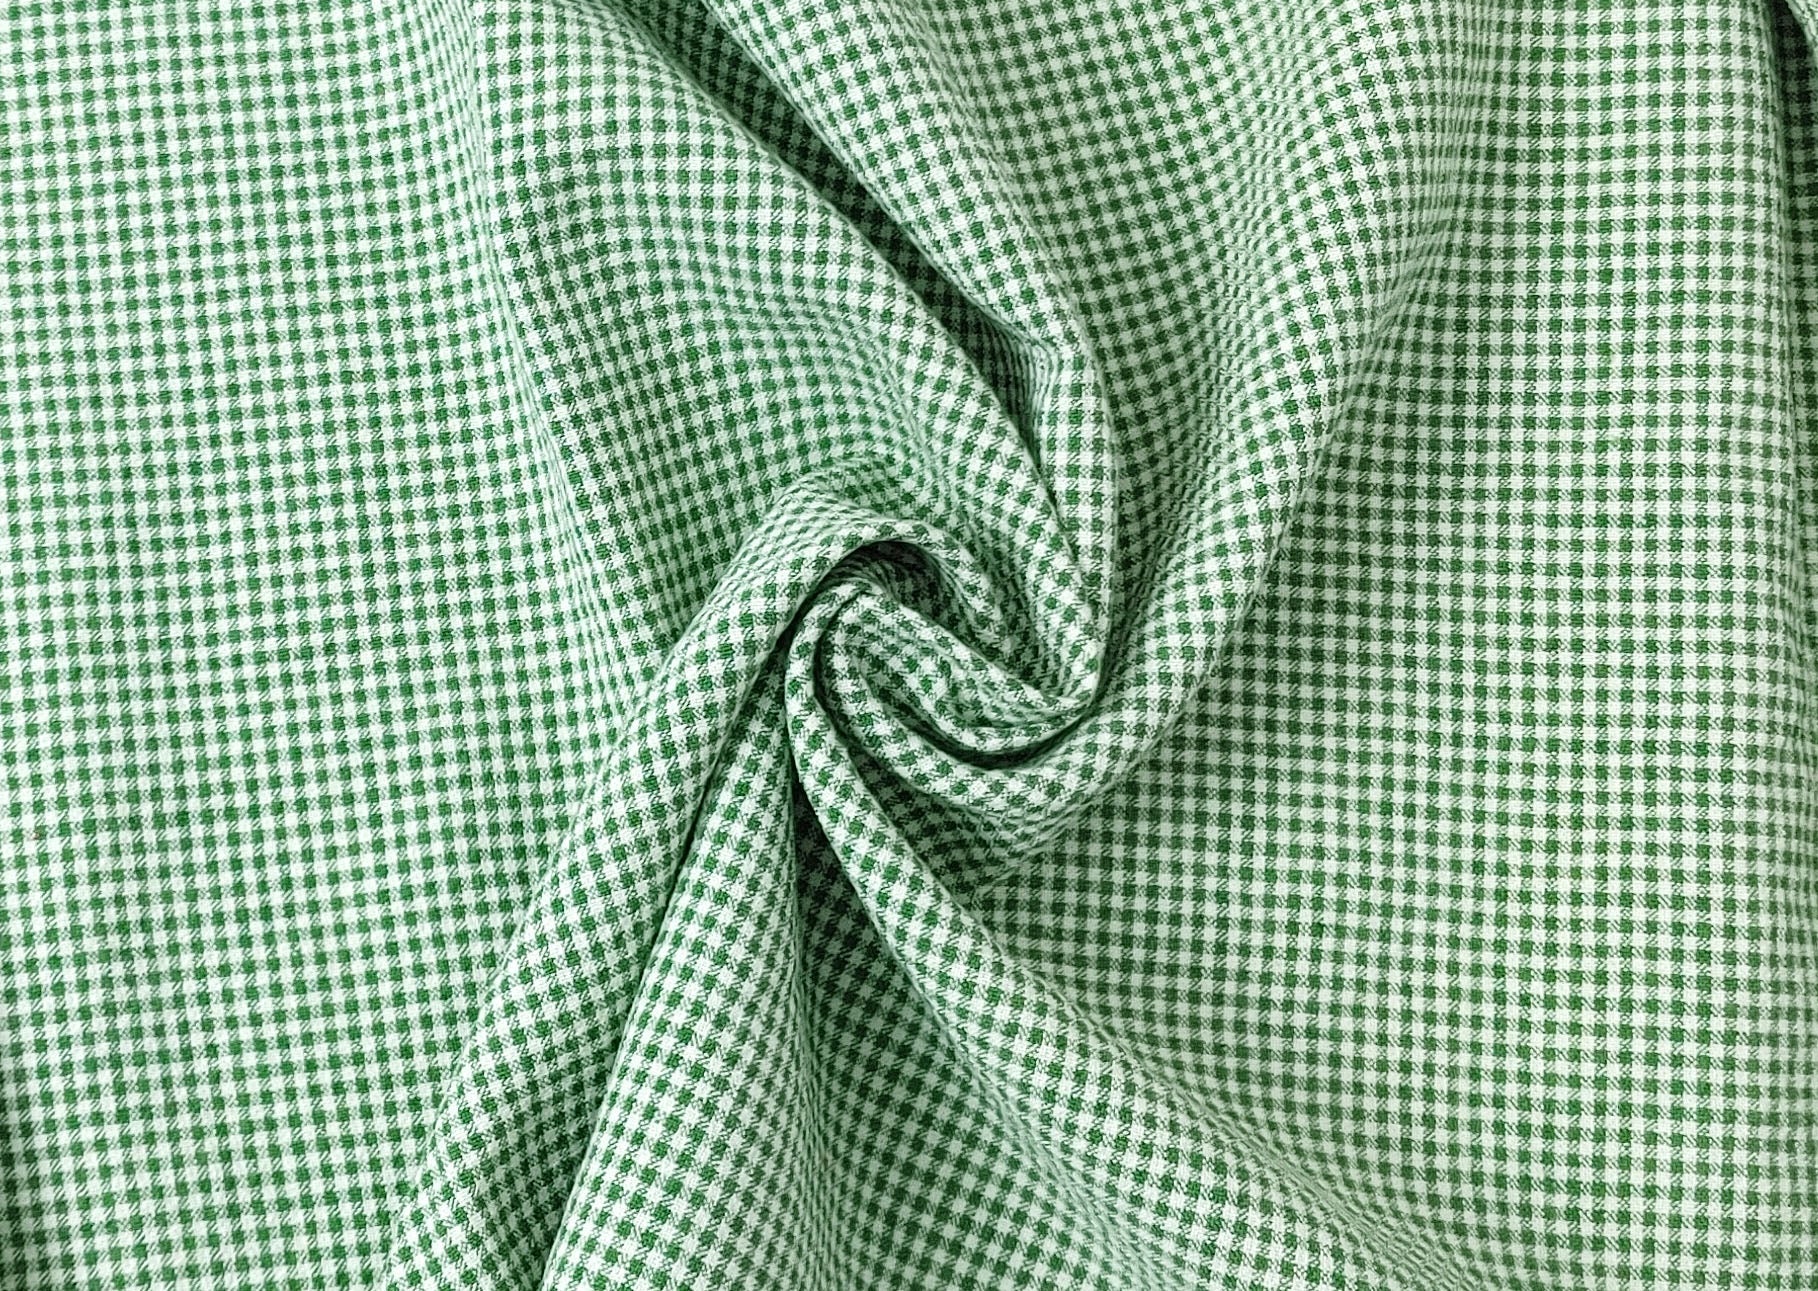 Linen Nylon Cotton Small Check Fabric with Subtle Seersucker Effect - A Blend of Comfort and Style 7635 7636 - The Linen Lab - Red